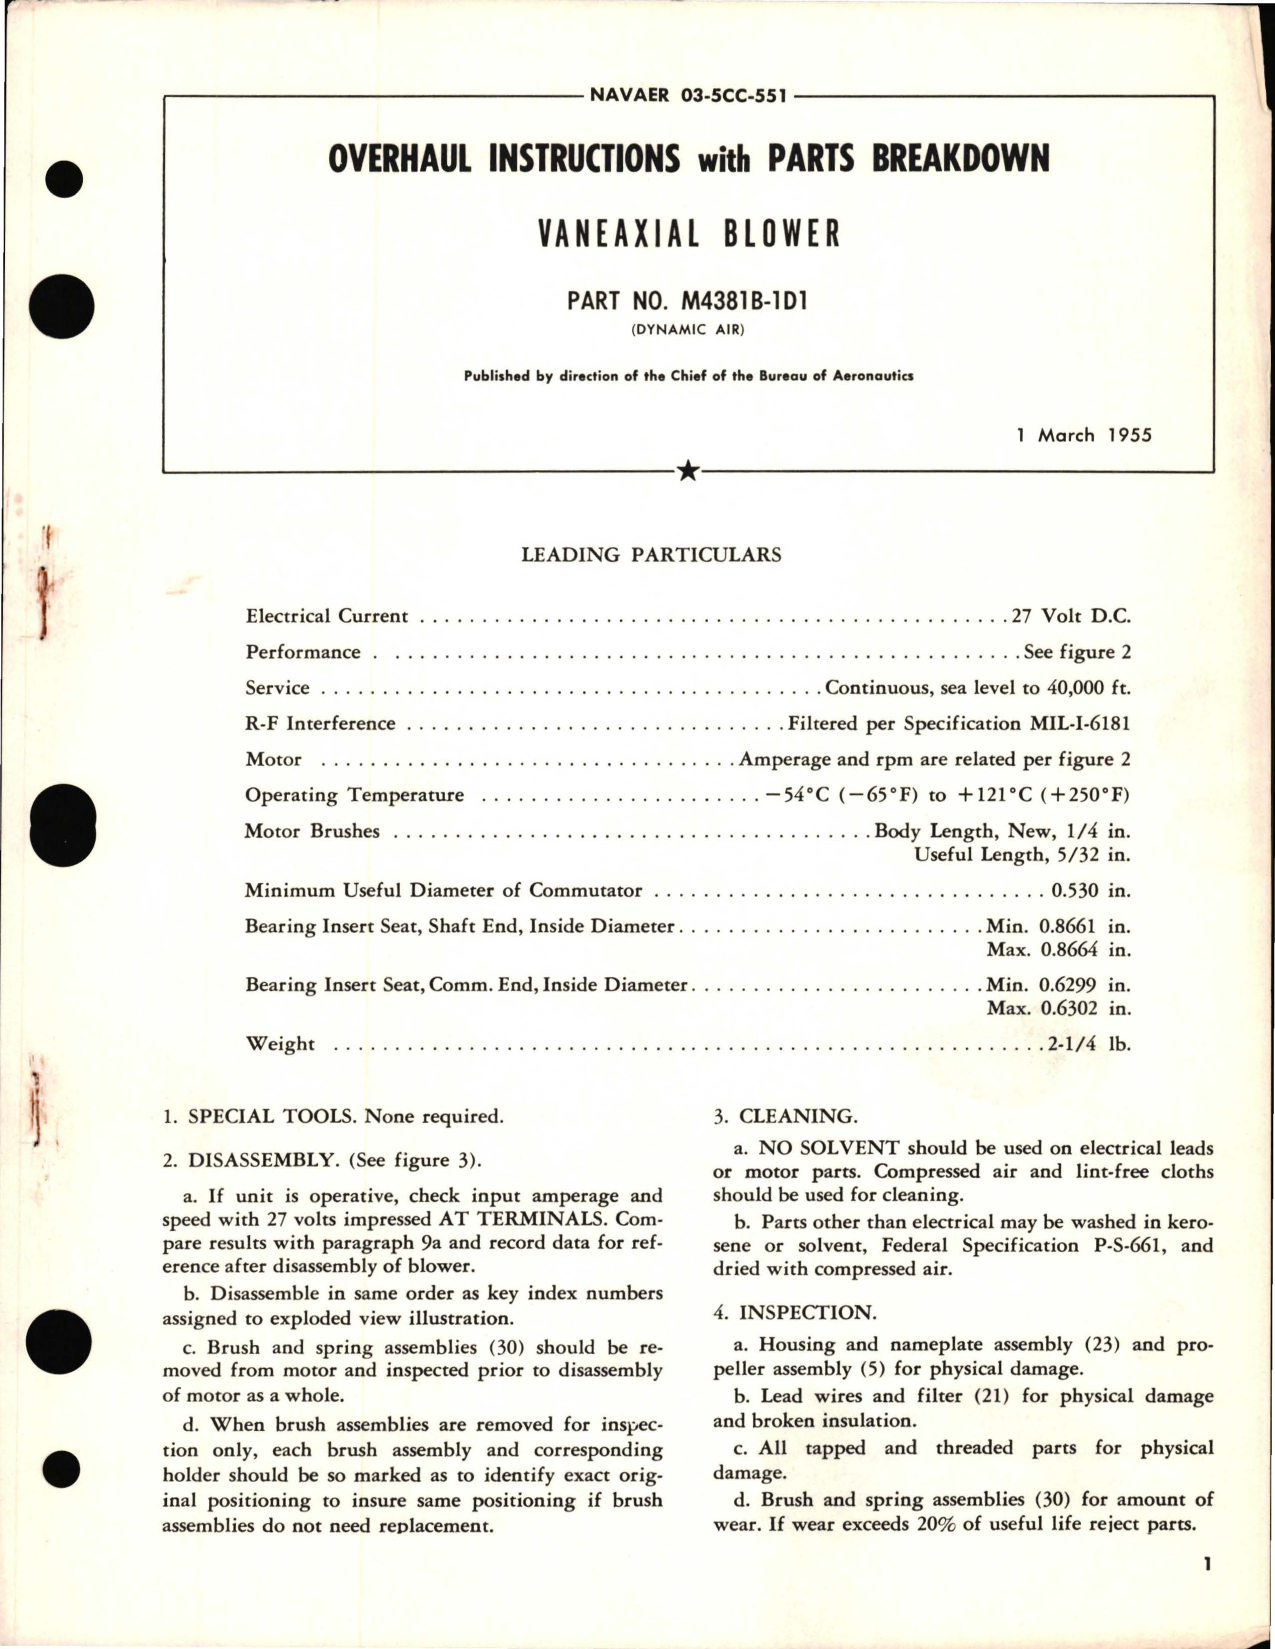 Sample page 1 from AirCorps Library document: Overhaul Instructions with Parts Breakdown for Vaneaxial Blower - Part M4381B-1D1